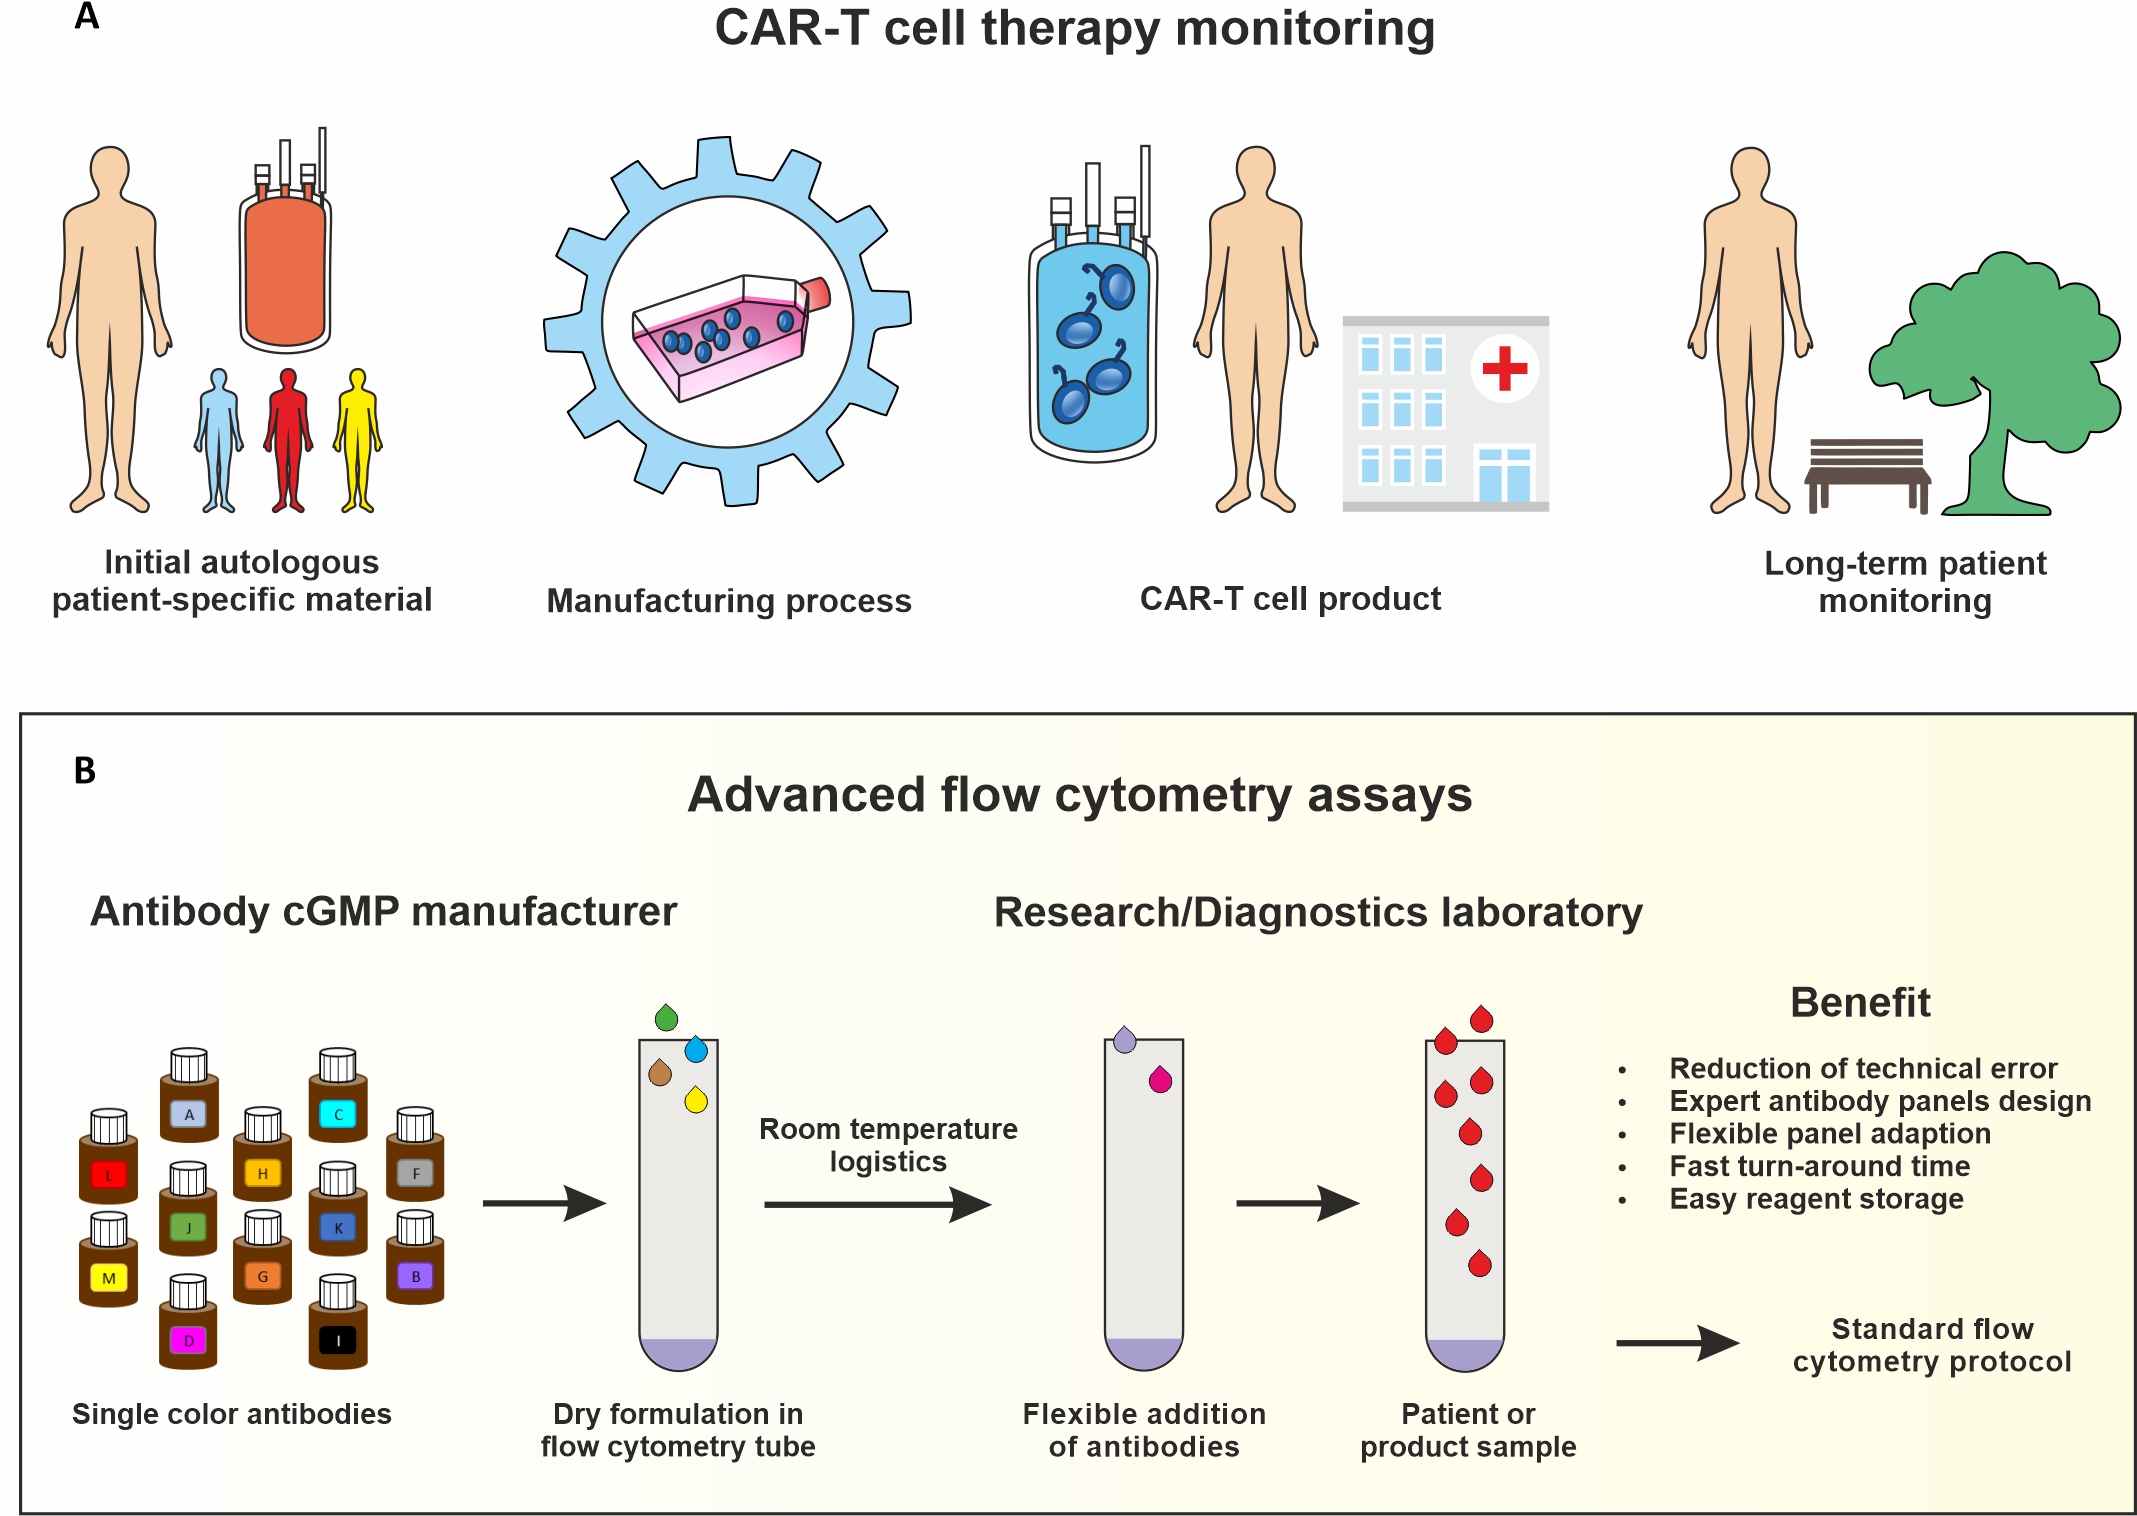 Schematic representation of monitoring CAR T cell therapies by flow cytometry